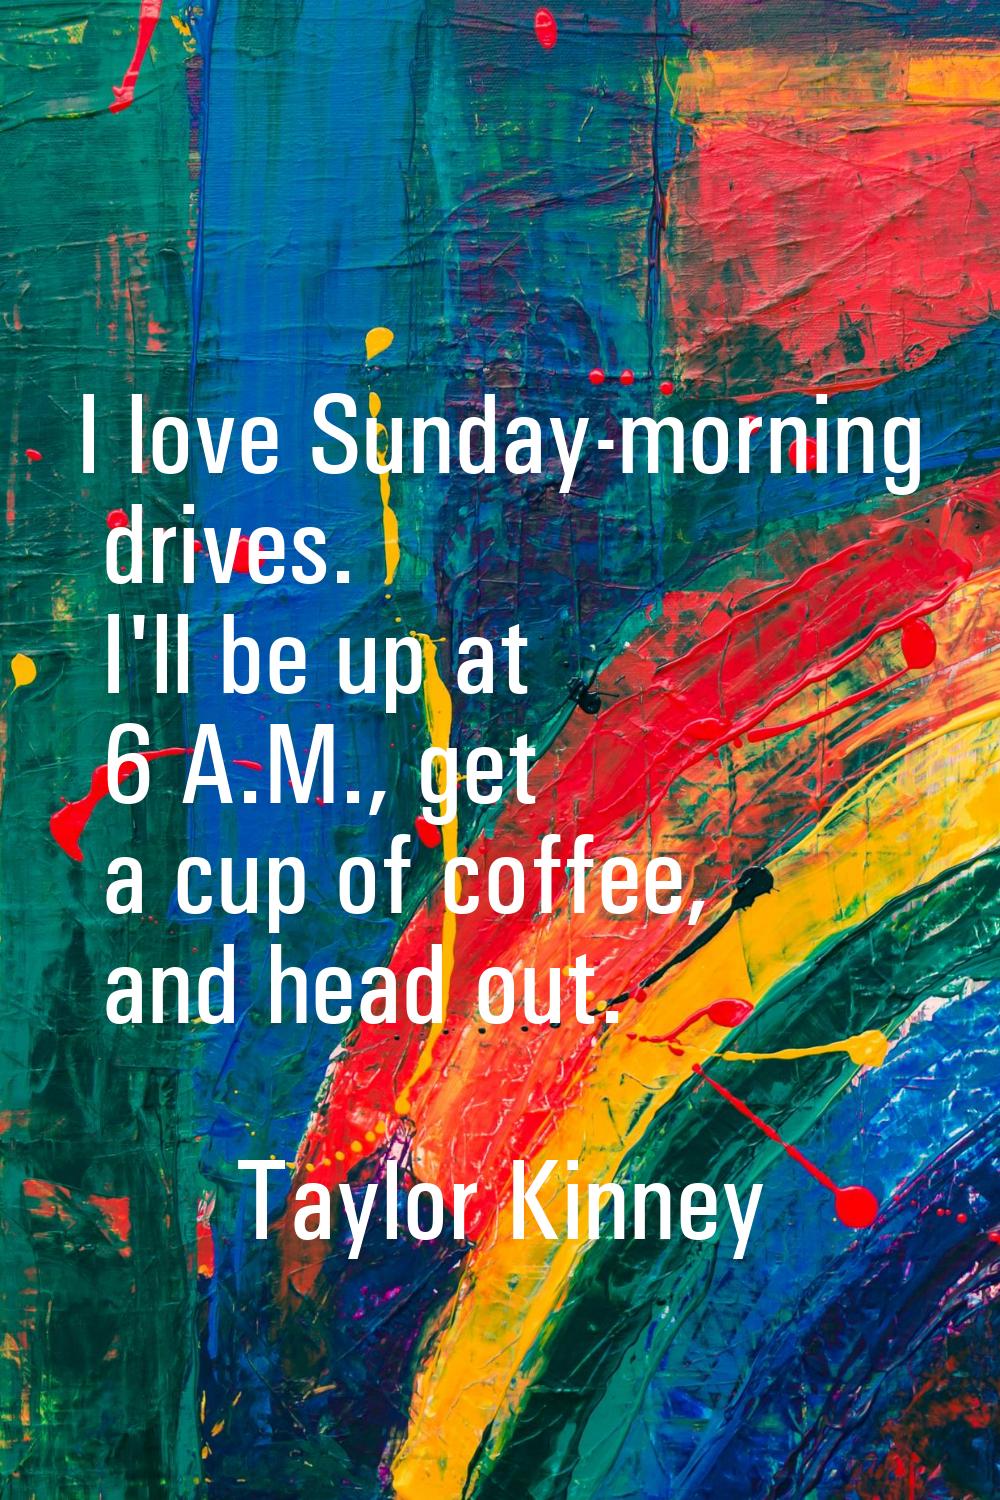 I love Sunday-morning drives. I'll be up at 6 A.M., get a cup of coffee, and head out.